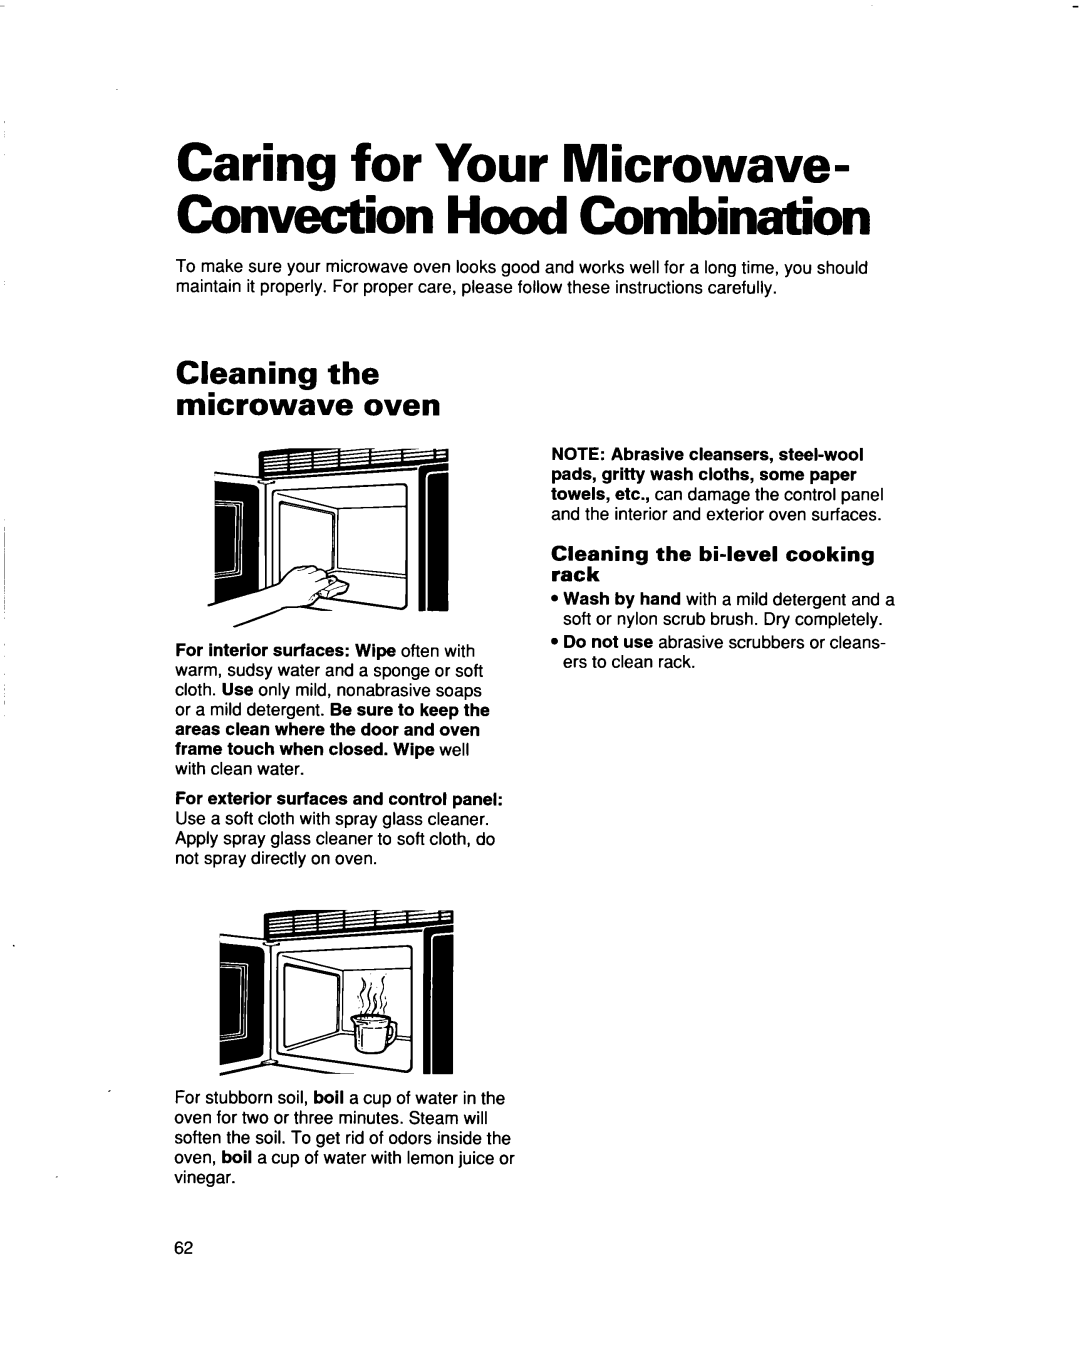 Whirlpool MH9115XB warranty Cleaning the microwave oven, C3Z;ning the bi-levelcooking 